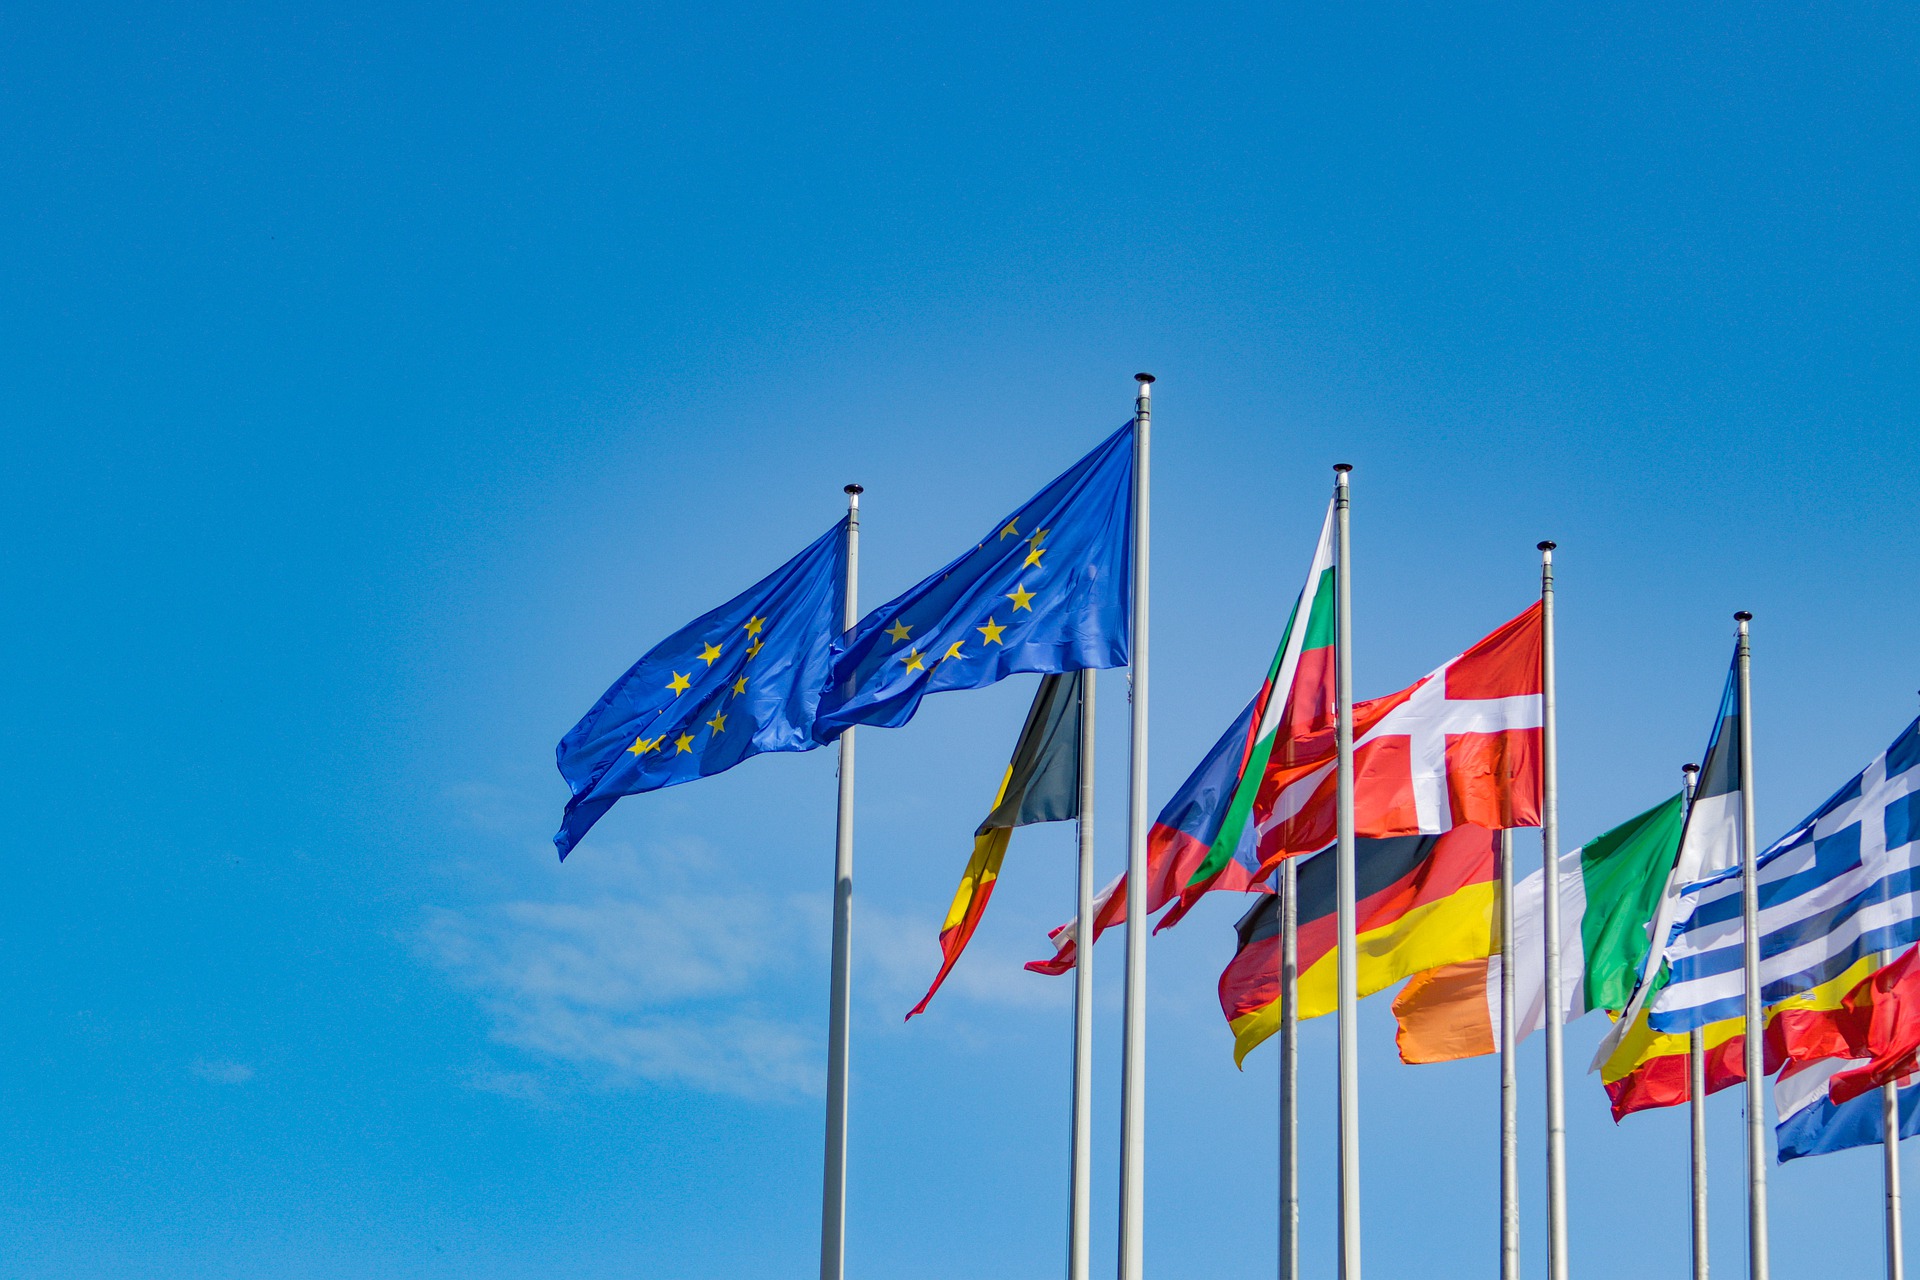 EU and other European country flags